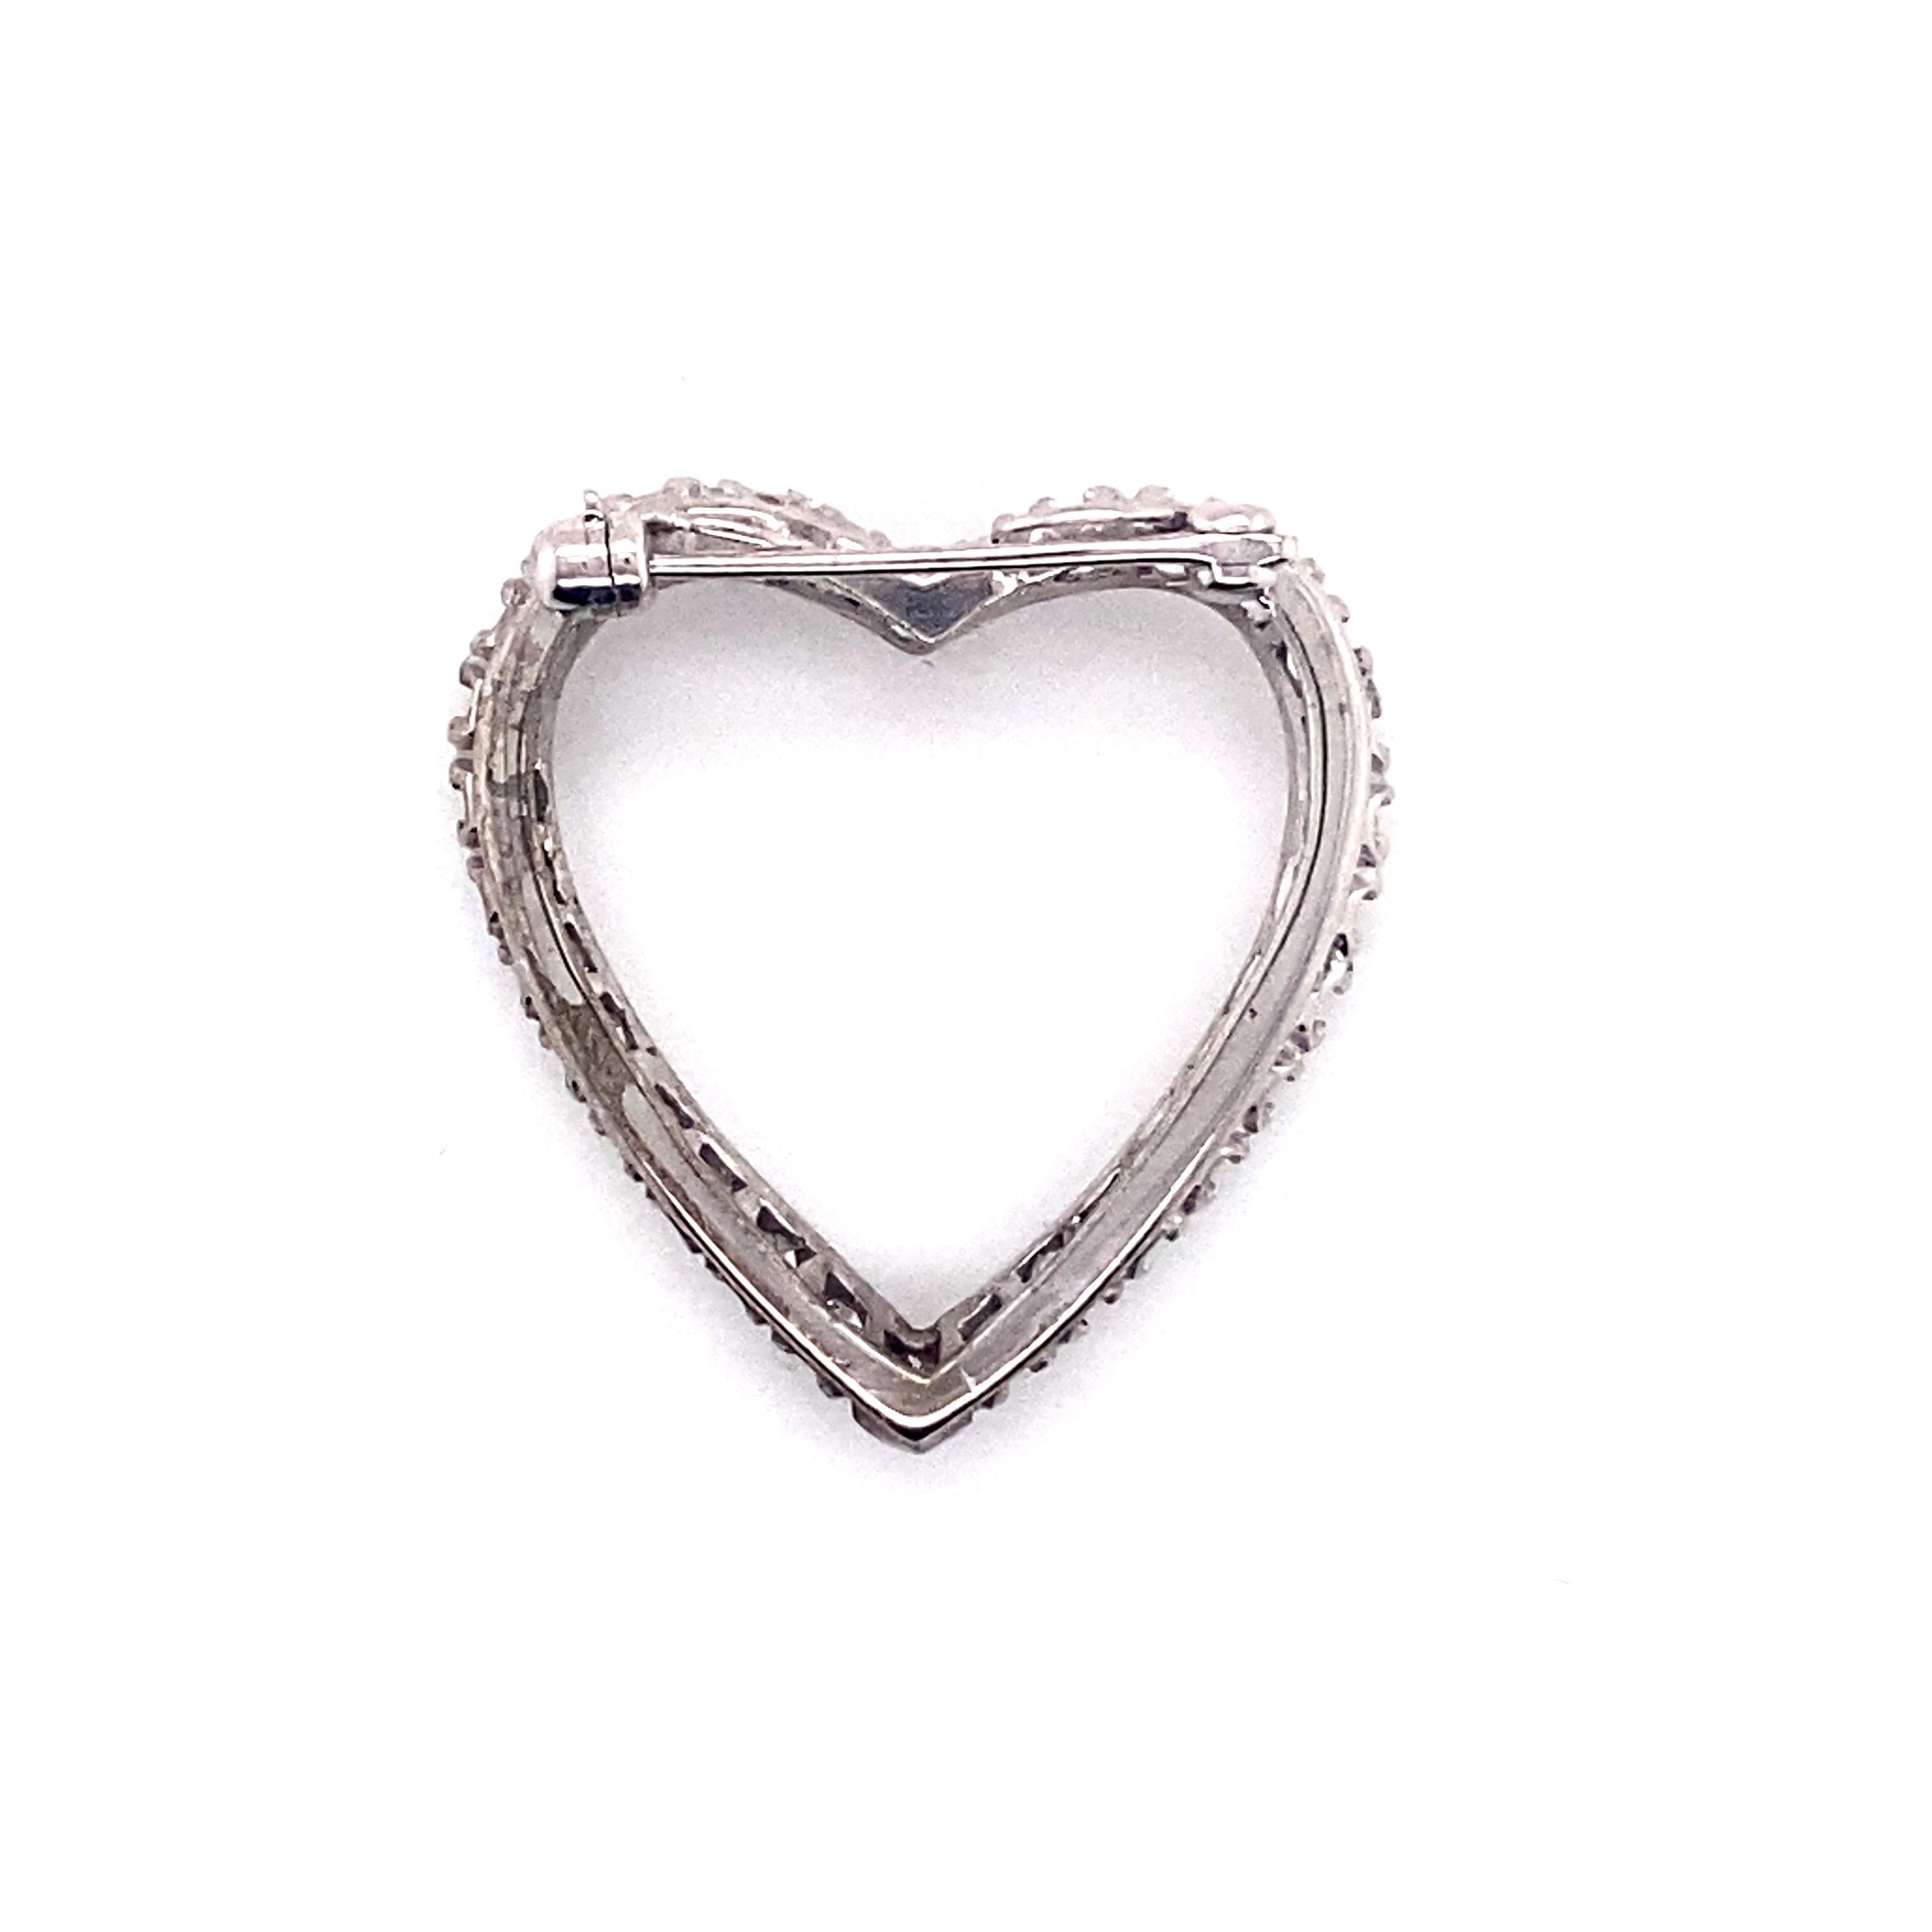 Vintage 1950’s White Gold Diamond Heart Pin and Pendant. There are 30 single cut diamonds prong set and weigh approximately 1.20ct total weight. The diamond quality is H - I color and VS1 - SI2 clarity. The pin measures 1